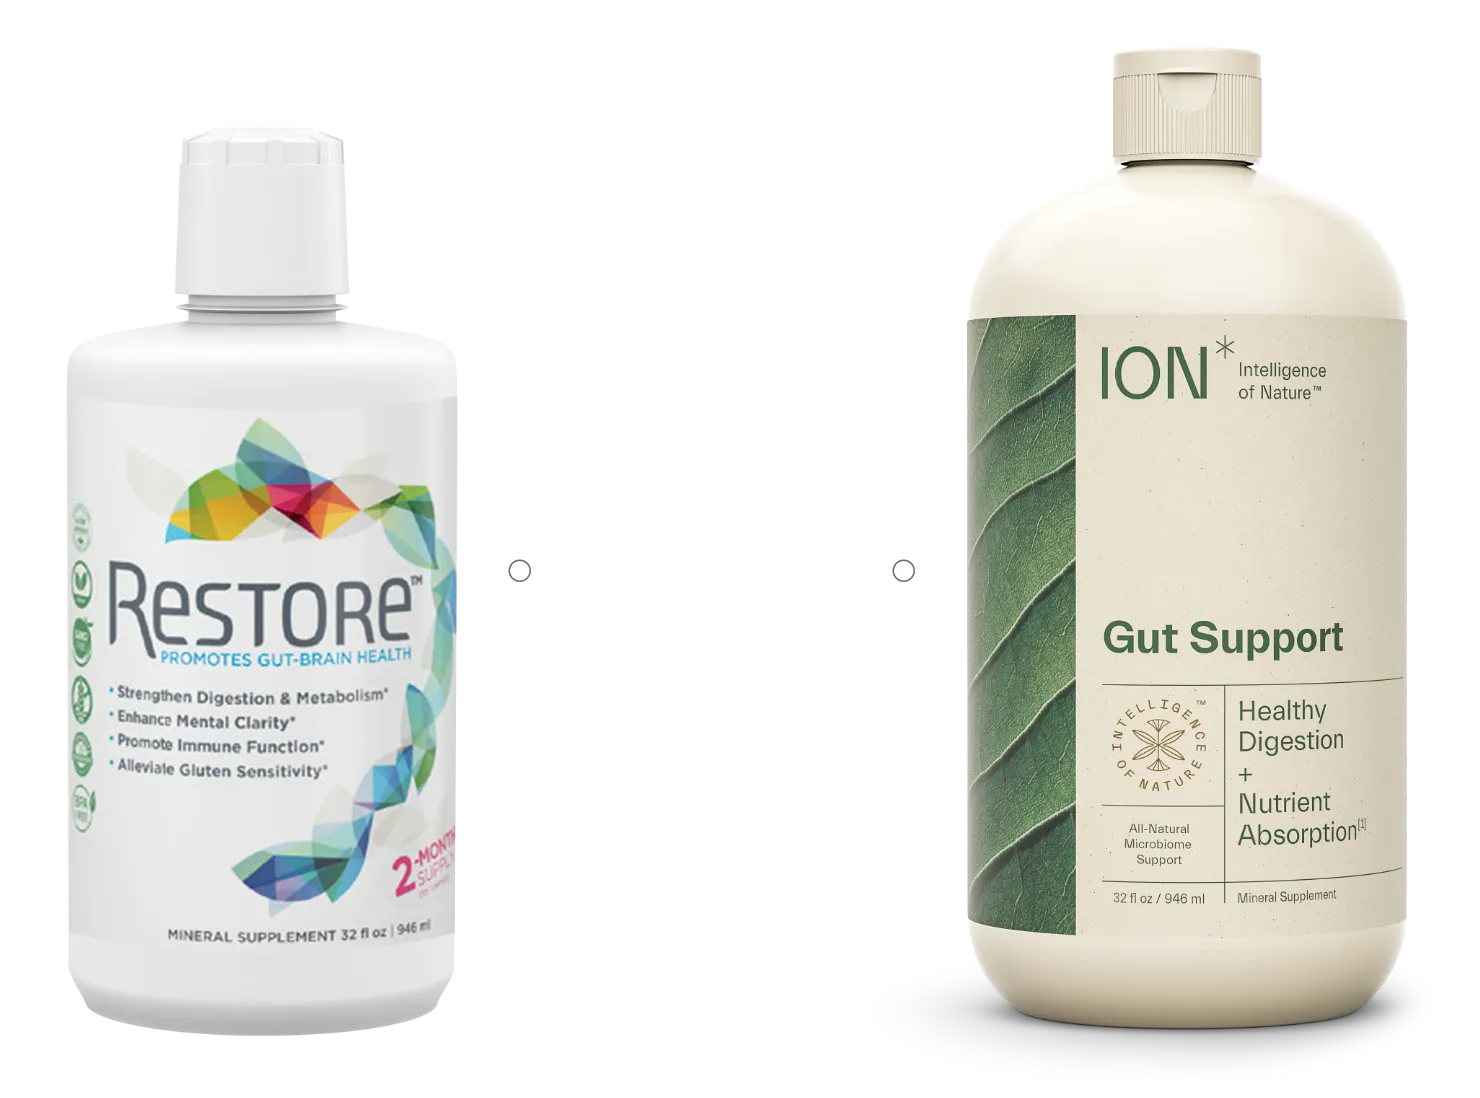 RESTORE Gut Health is now ION* Gut Support